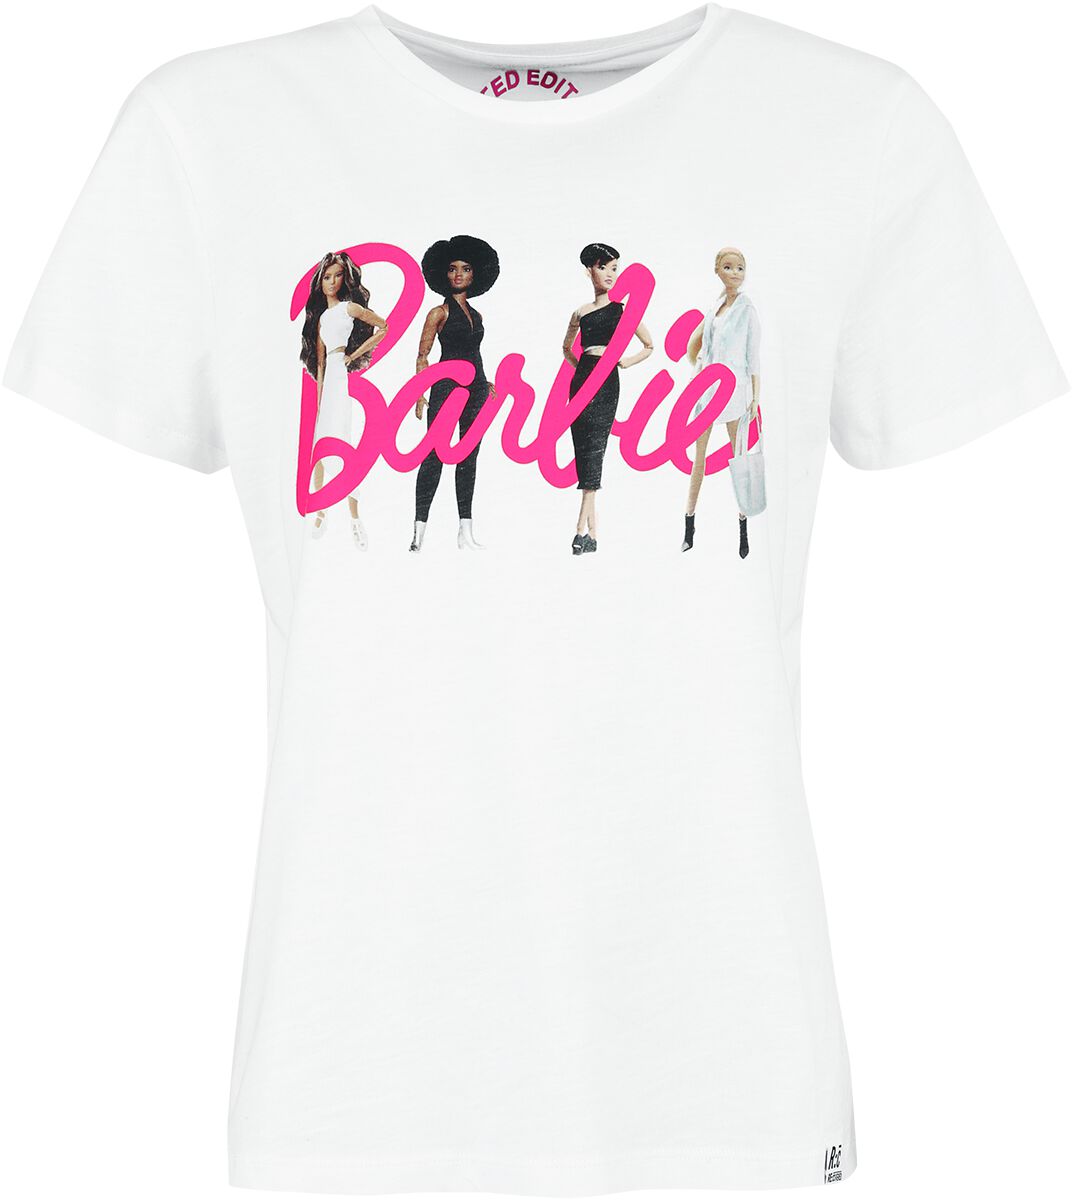 Barbie Recovered - Here Come The Girls T-Shirt weiß in M